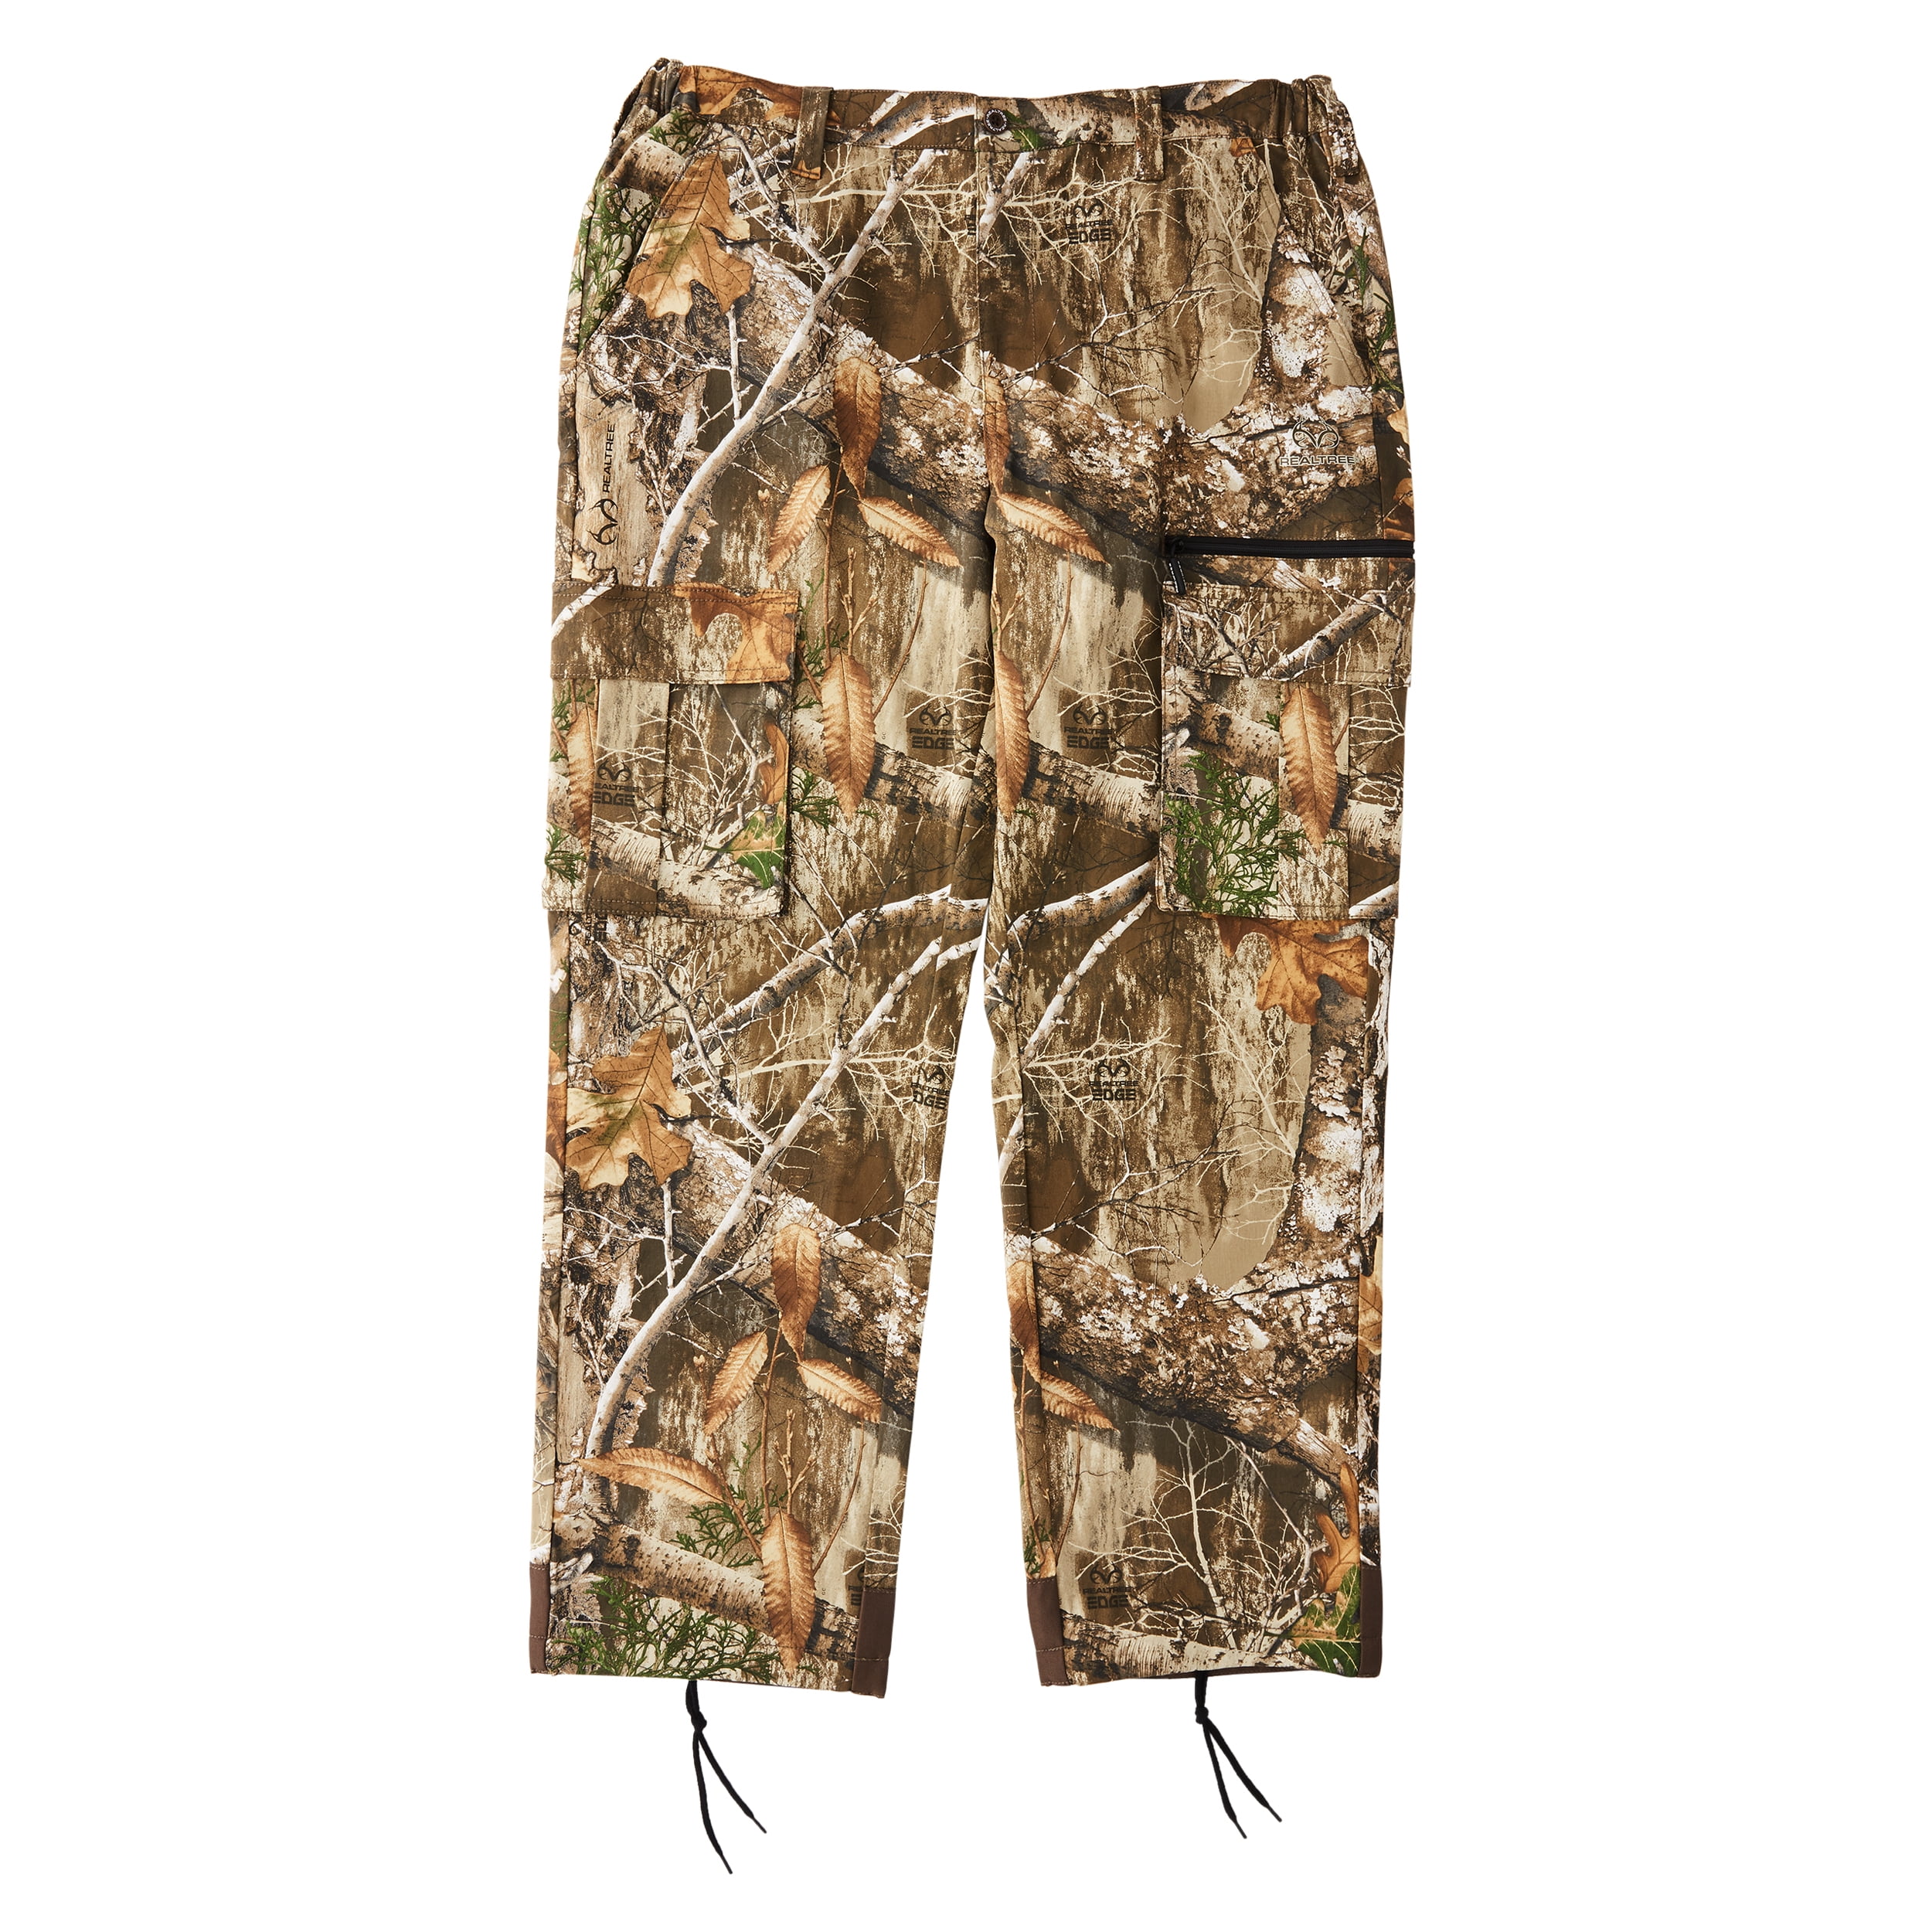 Country DNA – The Mossy Oak Store